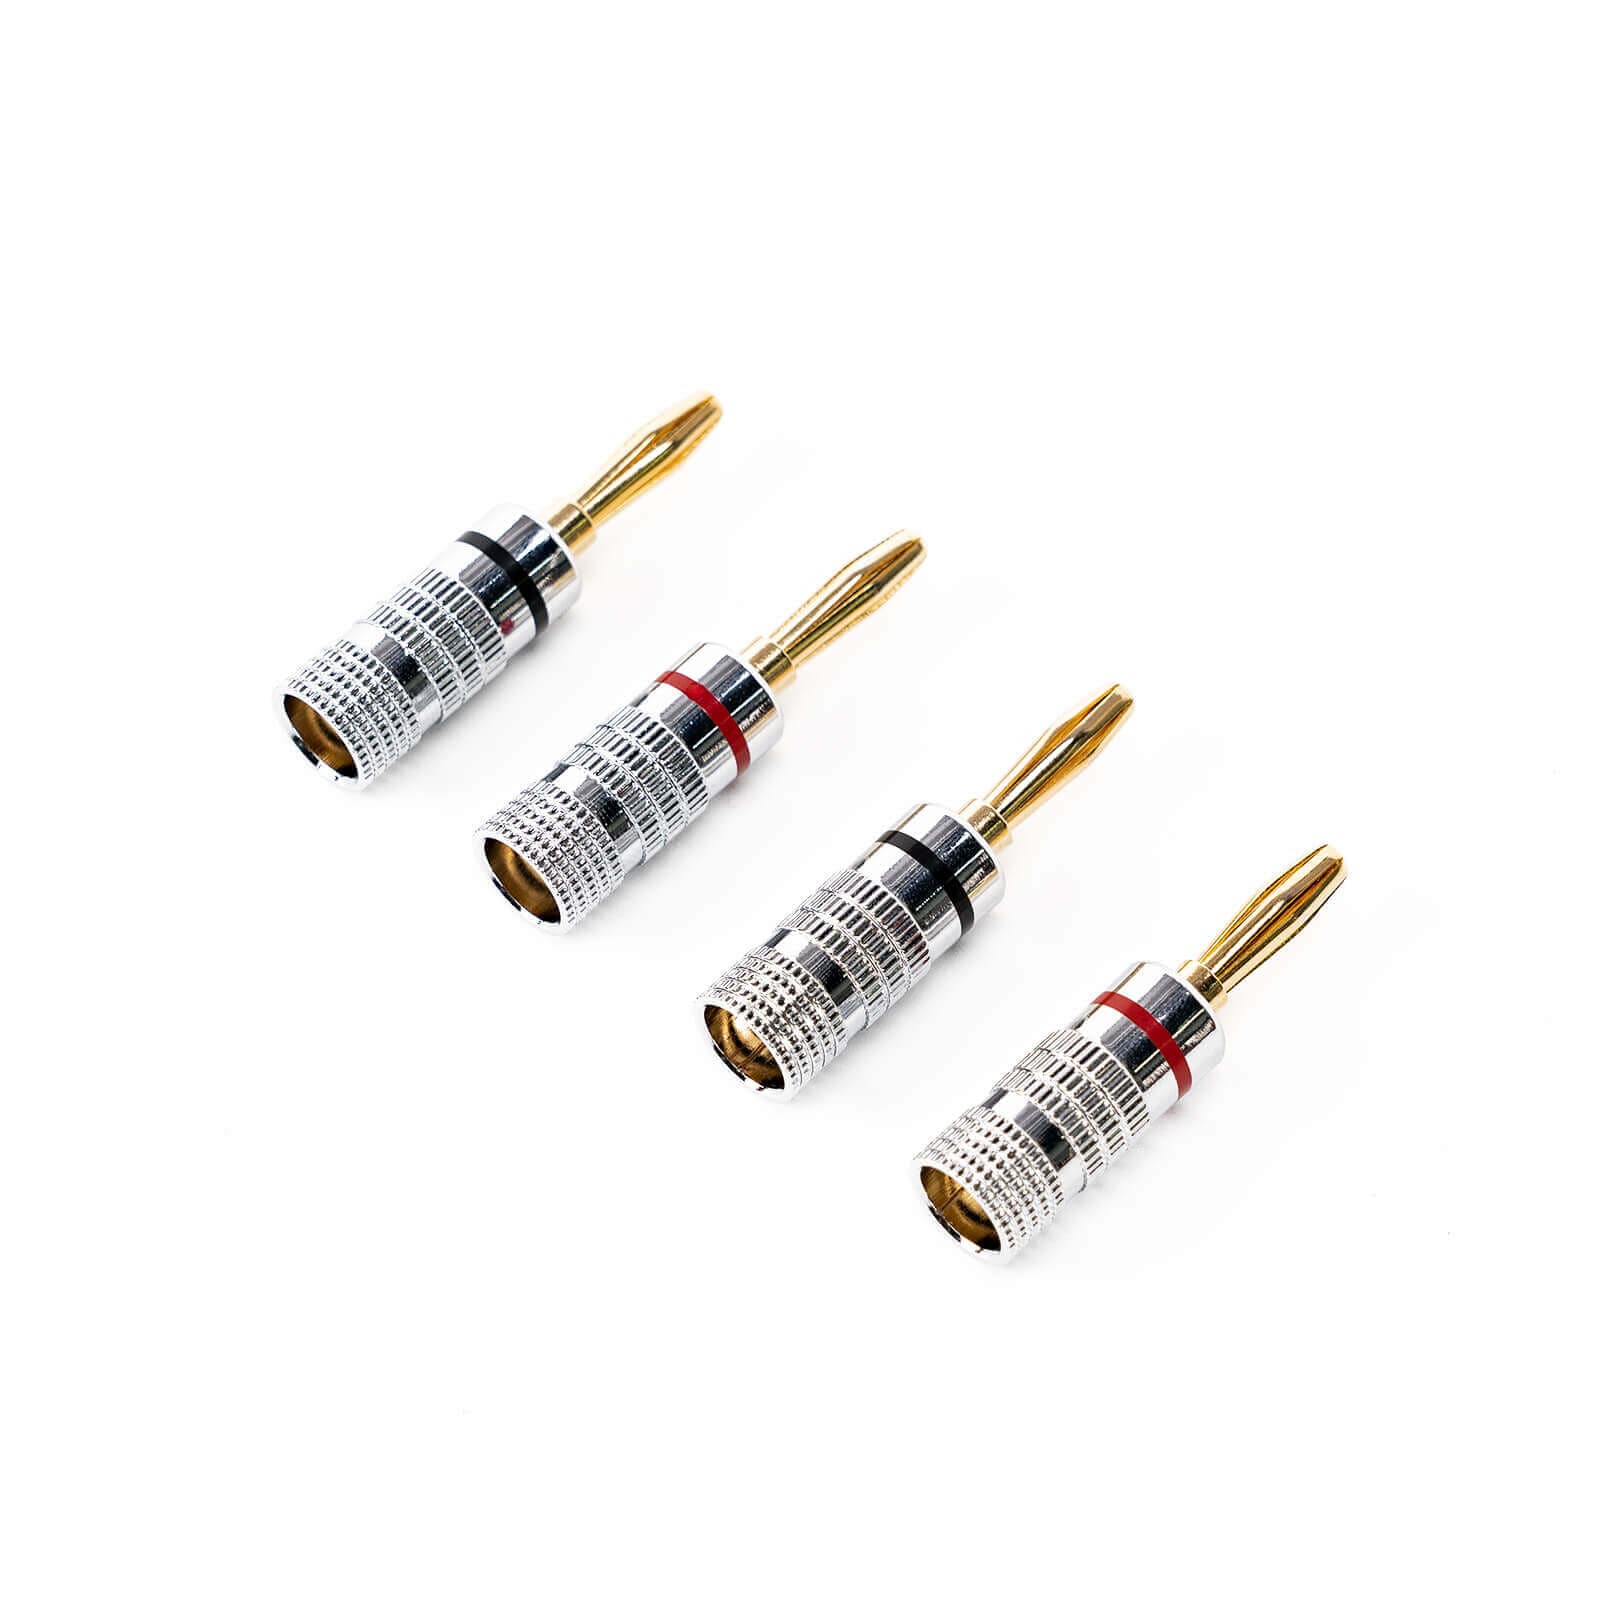 Banana Plugs 2Pairs/ 4 pcs, 24K Gold Plated Dual Screws Jack Connectors for Amplifier, Speakers, Receiver